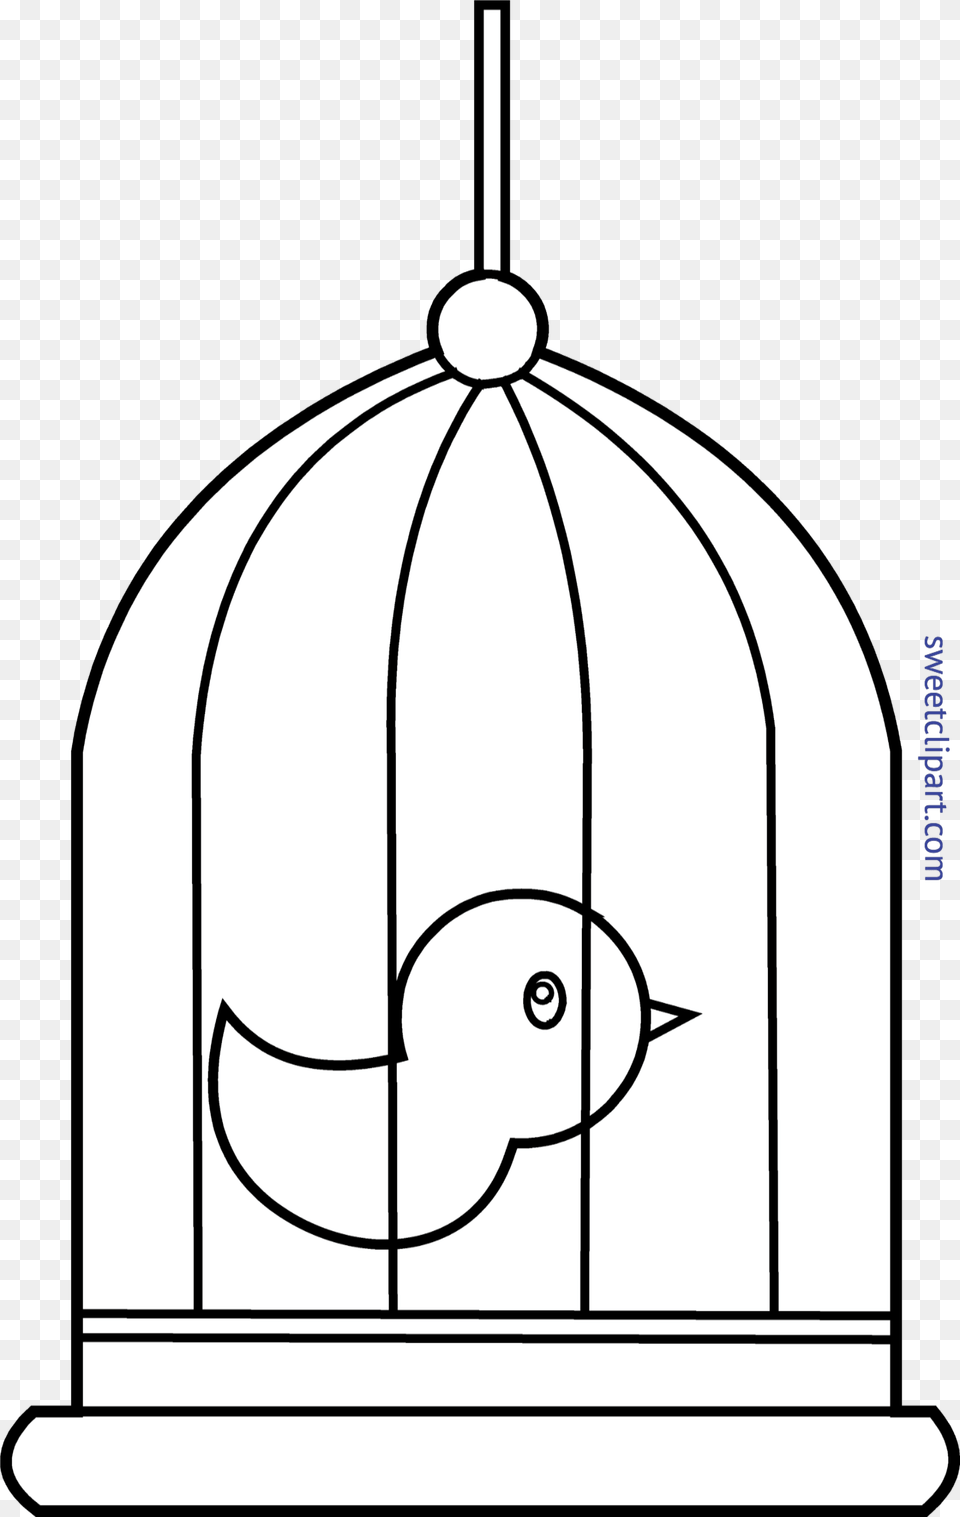 Library Of Dog Cage Banner Stock Files Clipart Clipart Black And White Birds In The Cage, Bird Feeder Free Transparent Png